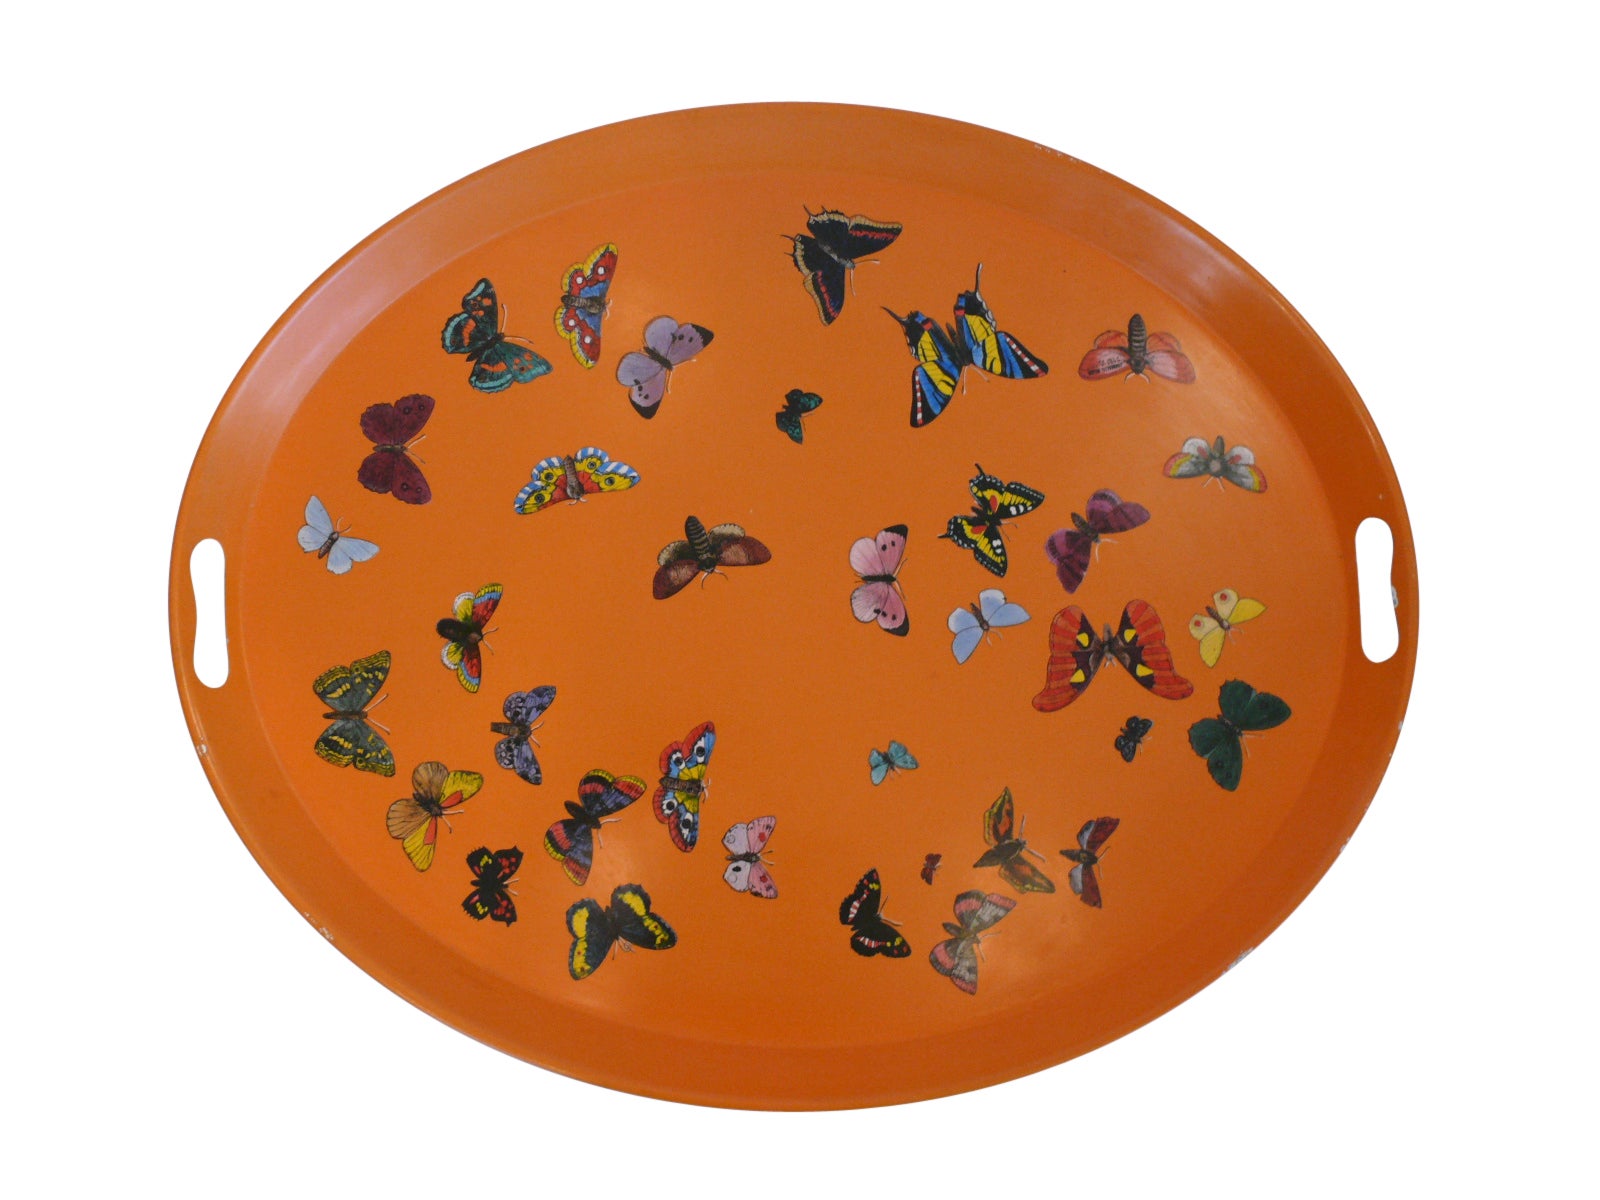 Butterfly Tray Table by Piero Fornasetti